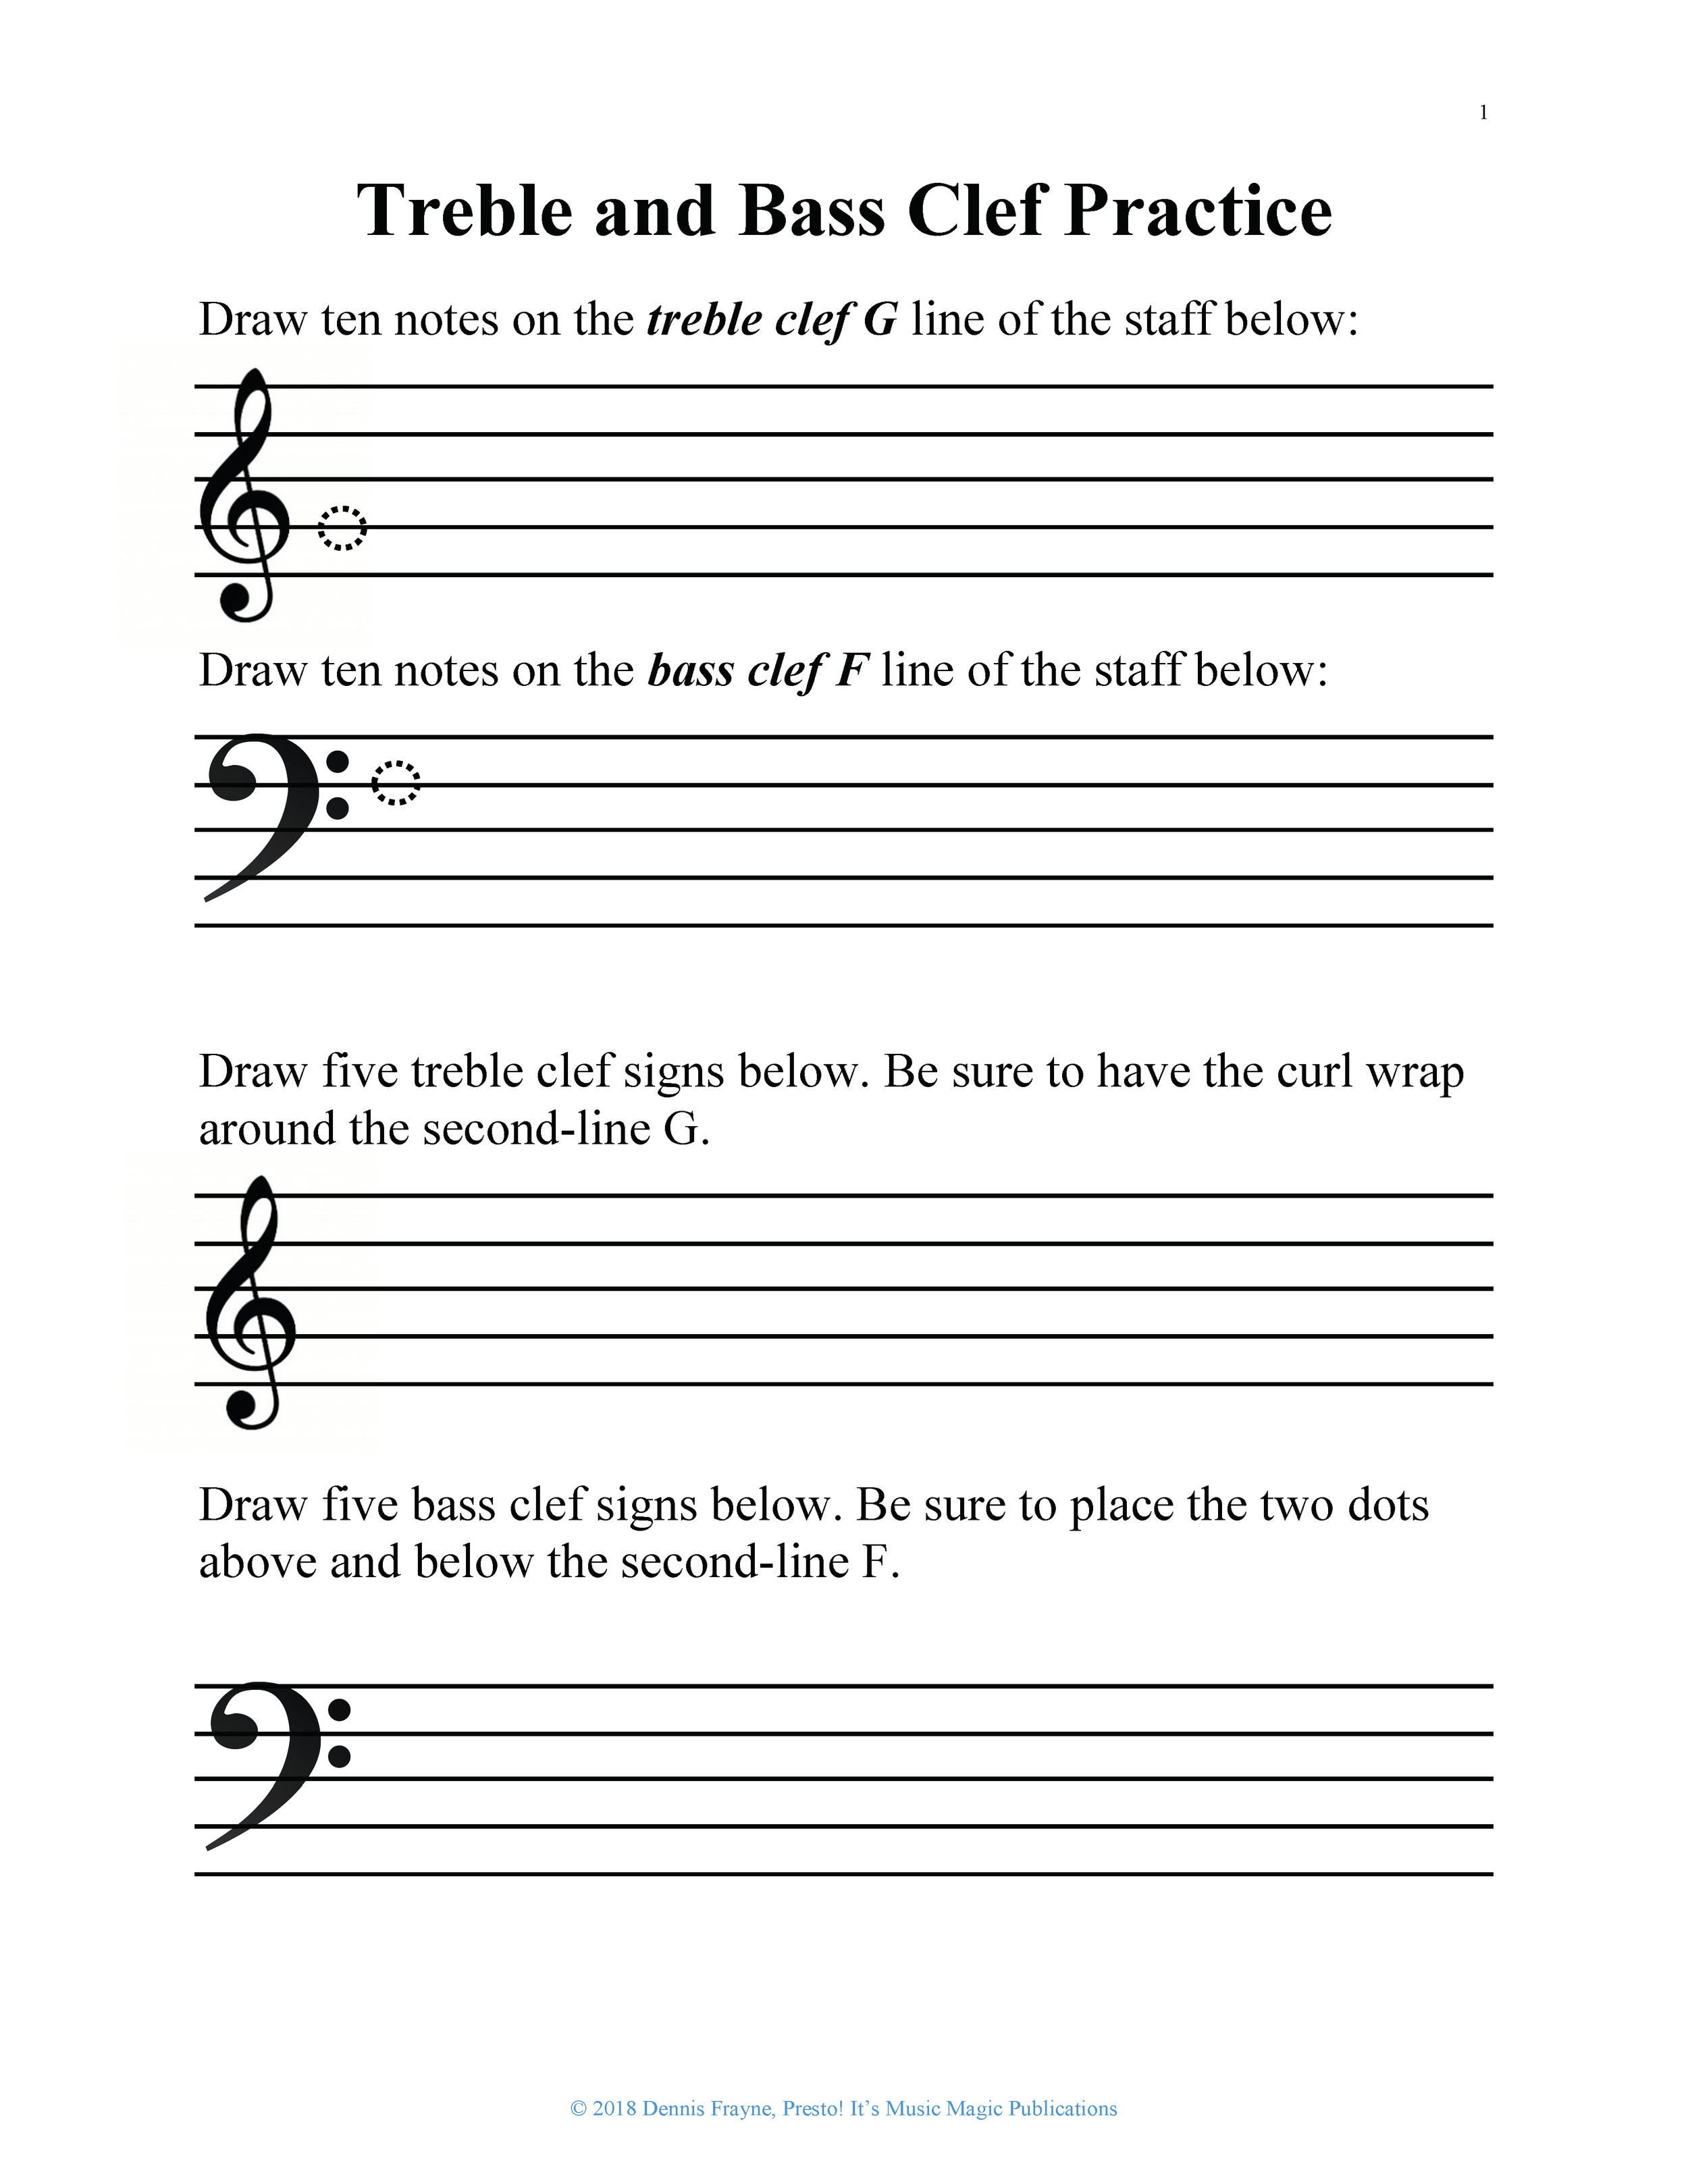 opus-music-theory-worksheets-free-download-goodimg-co